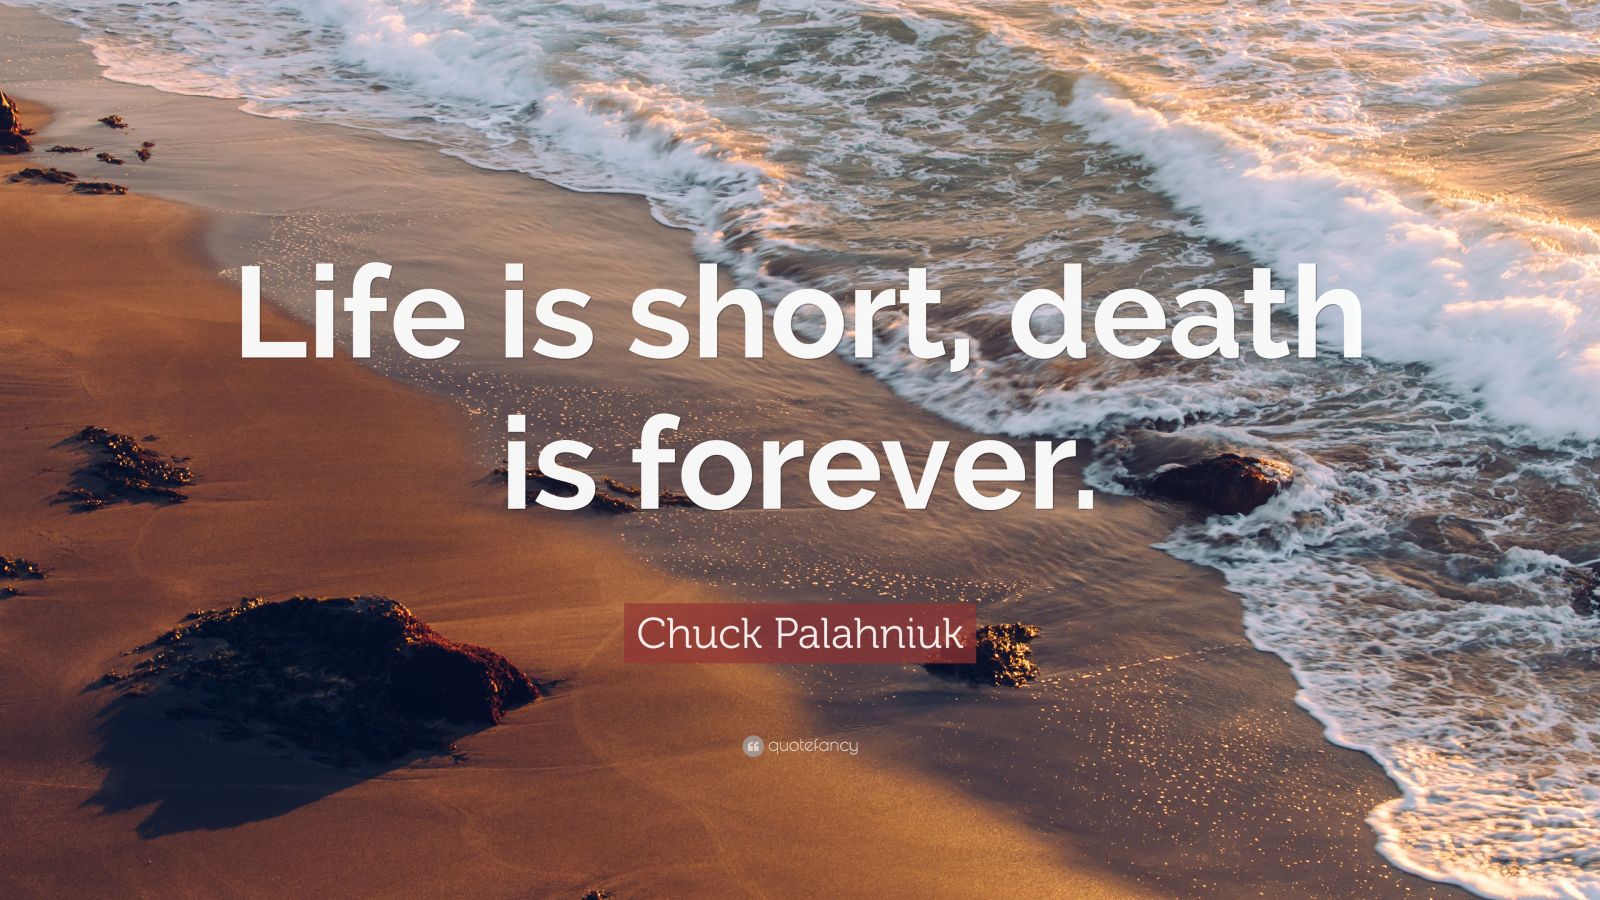 chuck-palahniuk-quote-life-is-short-death-is-forever-12